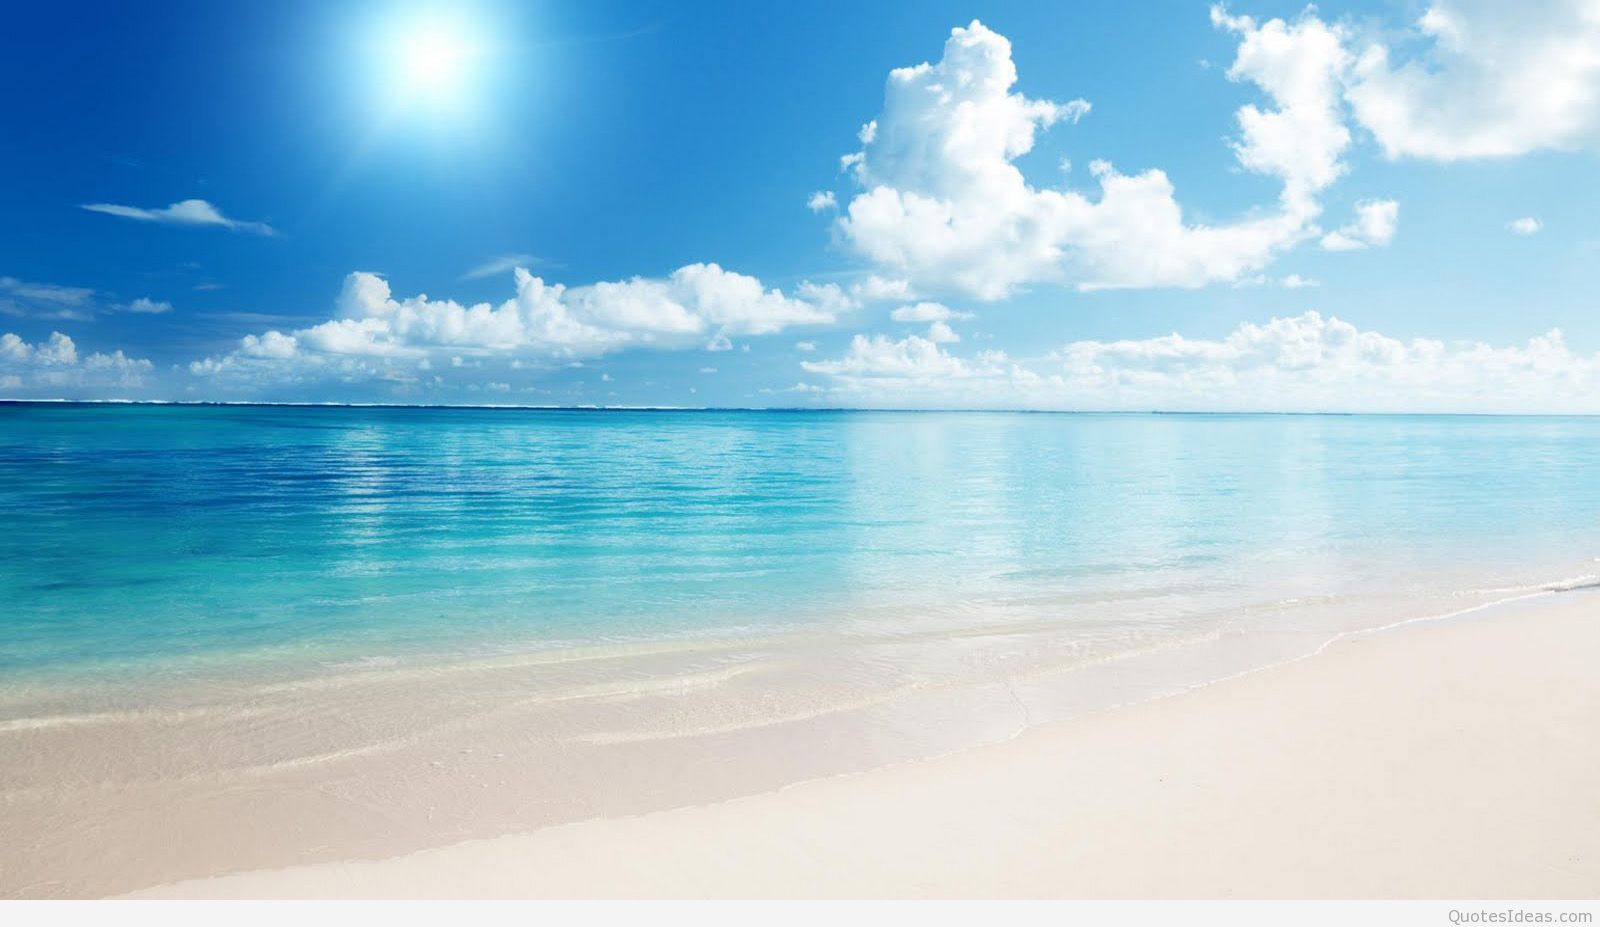 Summer Wallpaper Background With Sea And Beach